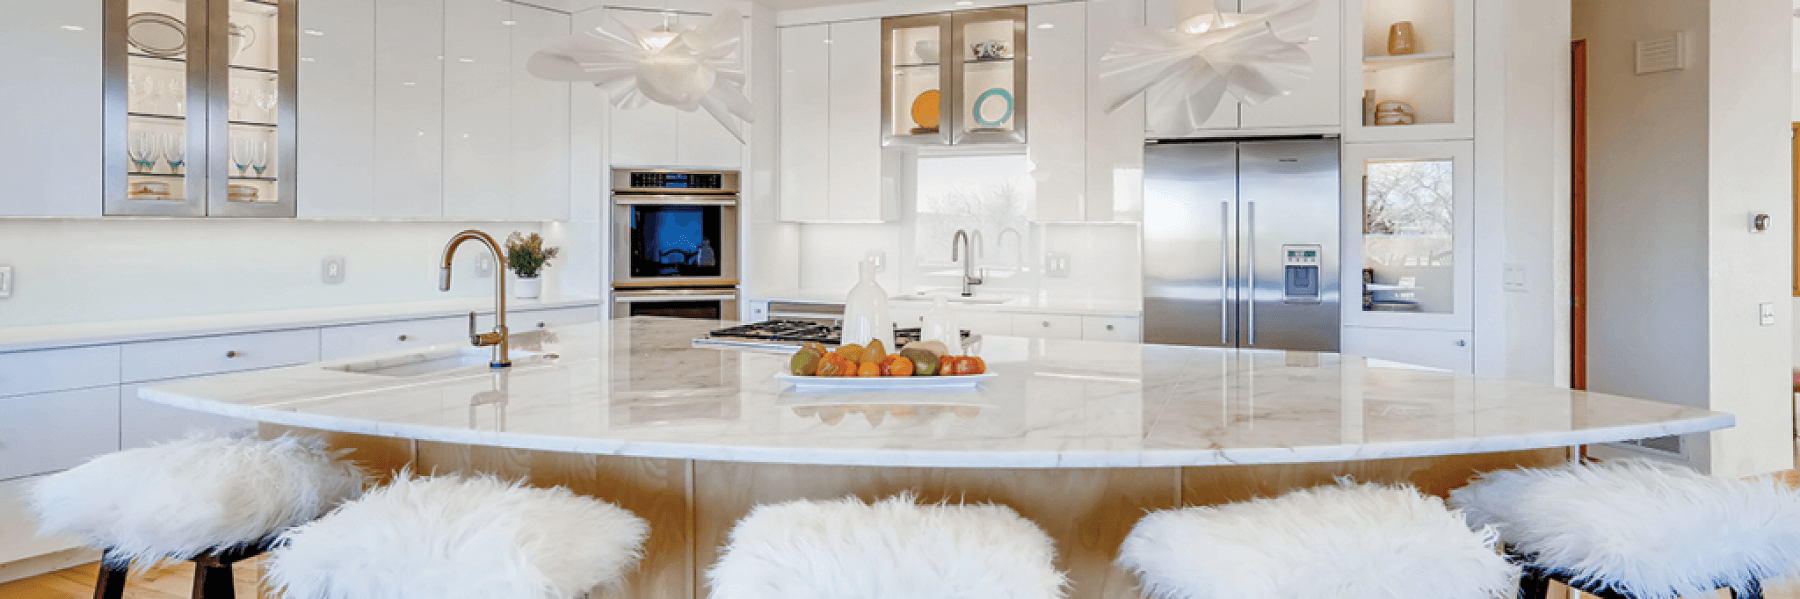 Experience Leads to Luxury Kitchens